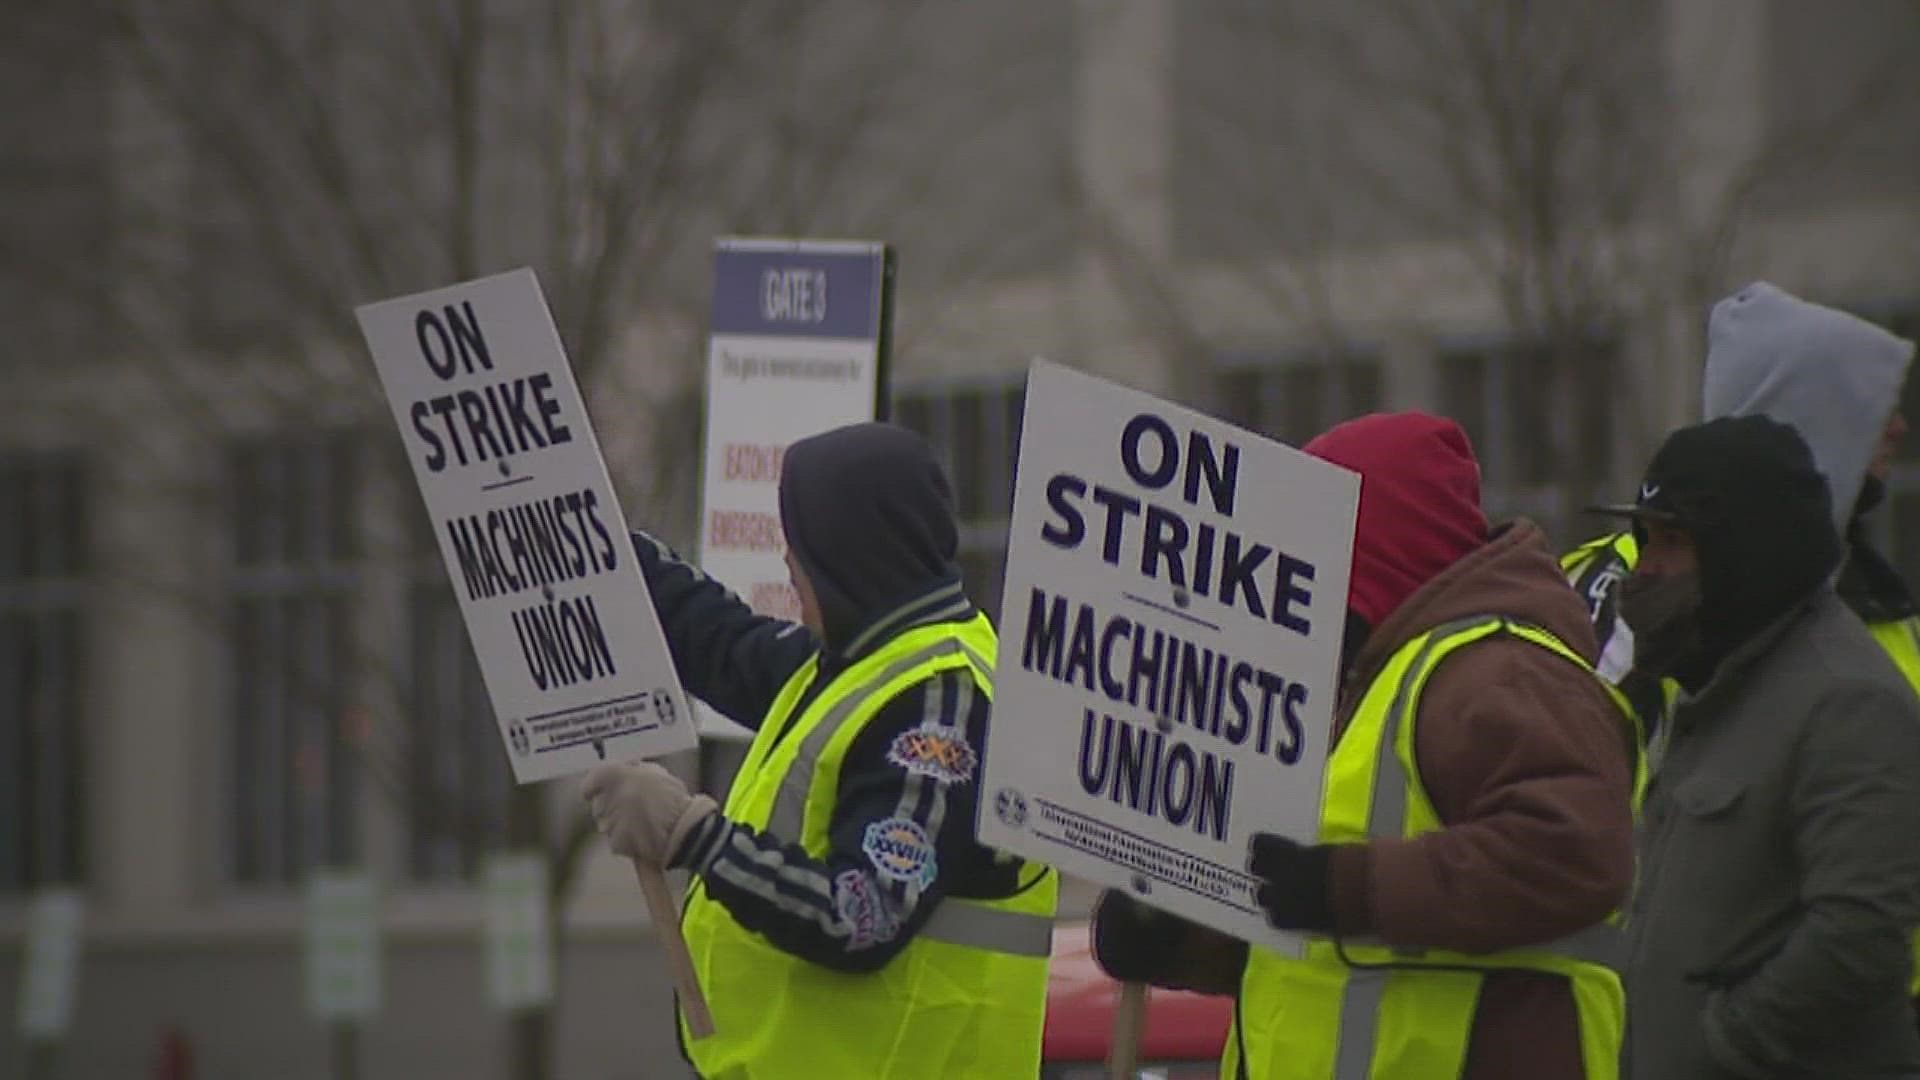 An IAM union rep told News 8 that hopes were high among workers as Eaton Corporation returned to contract negotiations on Tuesday.